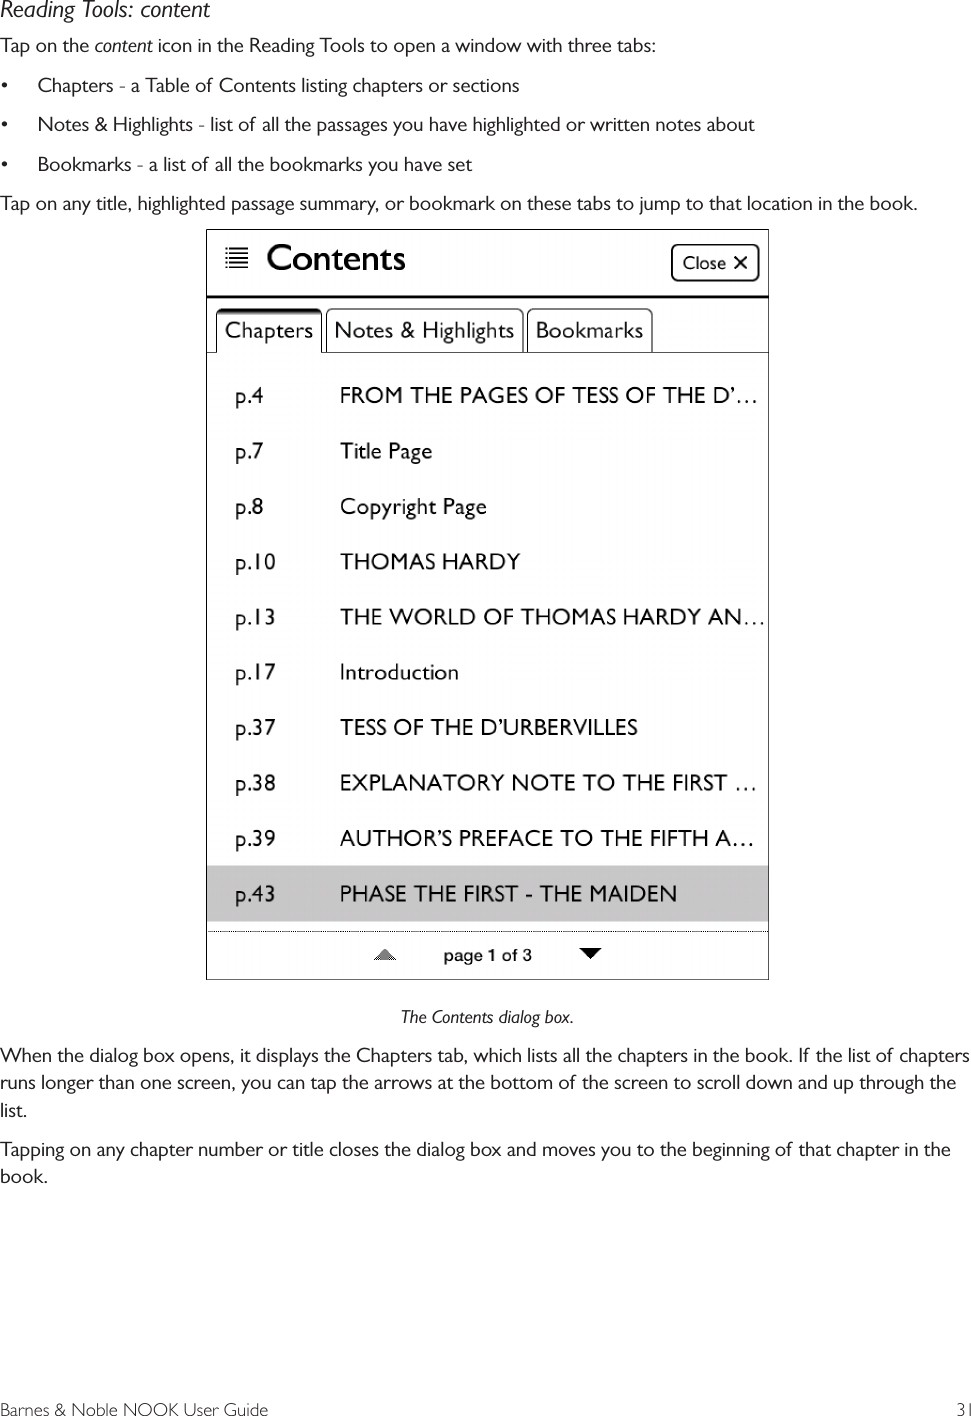 Barnes &amp; Noble NOOK User Guide  31Reading Tools: contentTap on the content icon in the Reading Tools to open a window with three tabs:•Chapters - a Table of Contents listing chapters or sections•Notes &amp; Highlights - list of all the passages you have highlighted or written notes about•Bookmarks - a list of all the bookmarks you have setTap on any title, highlighted passage summary, or bookmark on these tabs to jump to that location in the book.The Contents dialog box.When the dialog box opens, it displays the Chapters tab, which lists all the chapters in the book. If the list of chapters runs longer than one screen, you can tap the arrows at the bottom of the screen to scroll down and up through the list. Tapping on any chapter number or title closes the dialog box and moves you to the beginning of that chapter in the book.